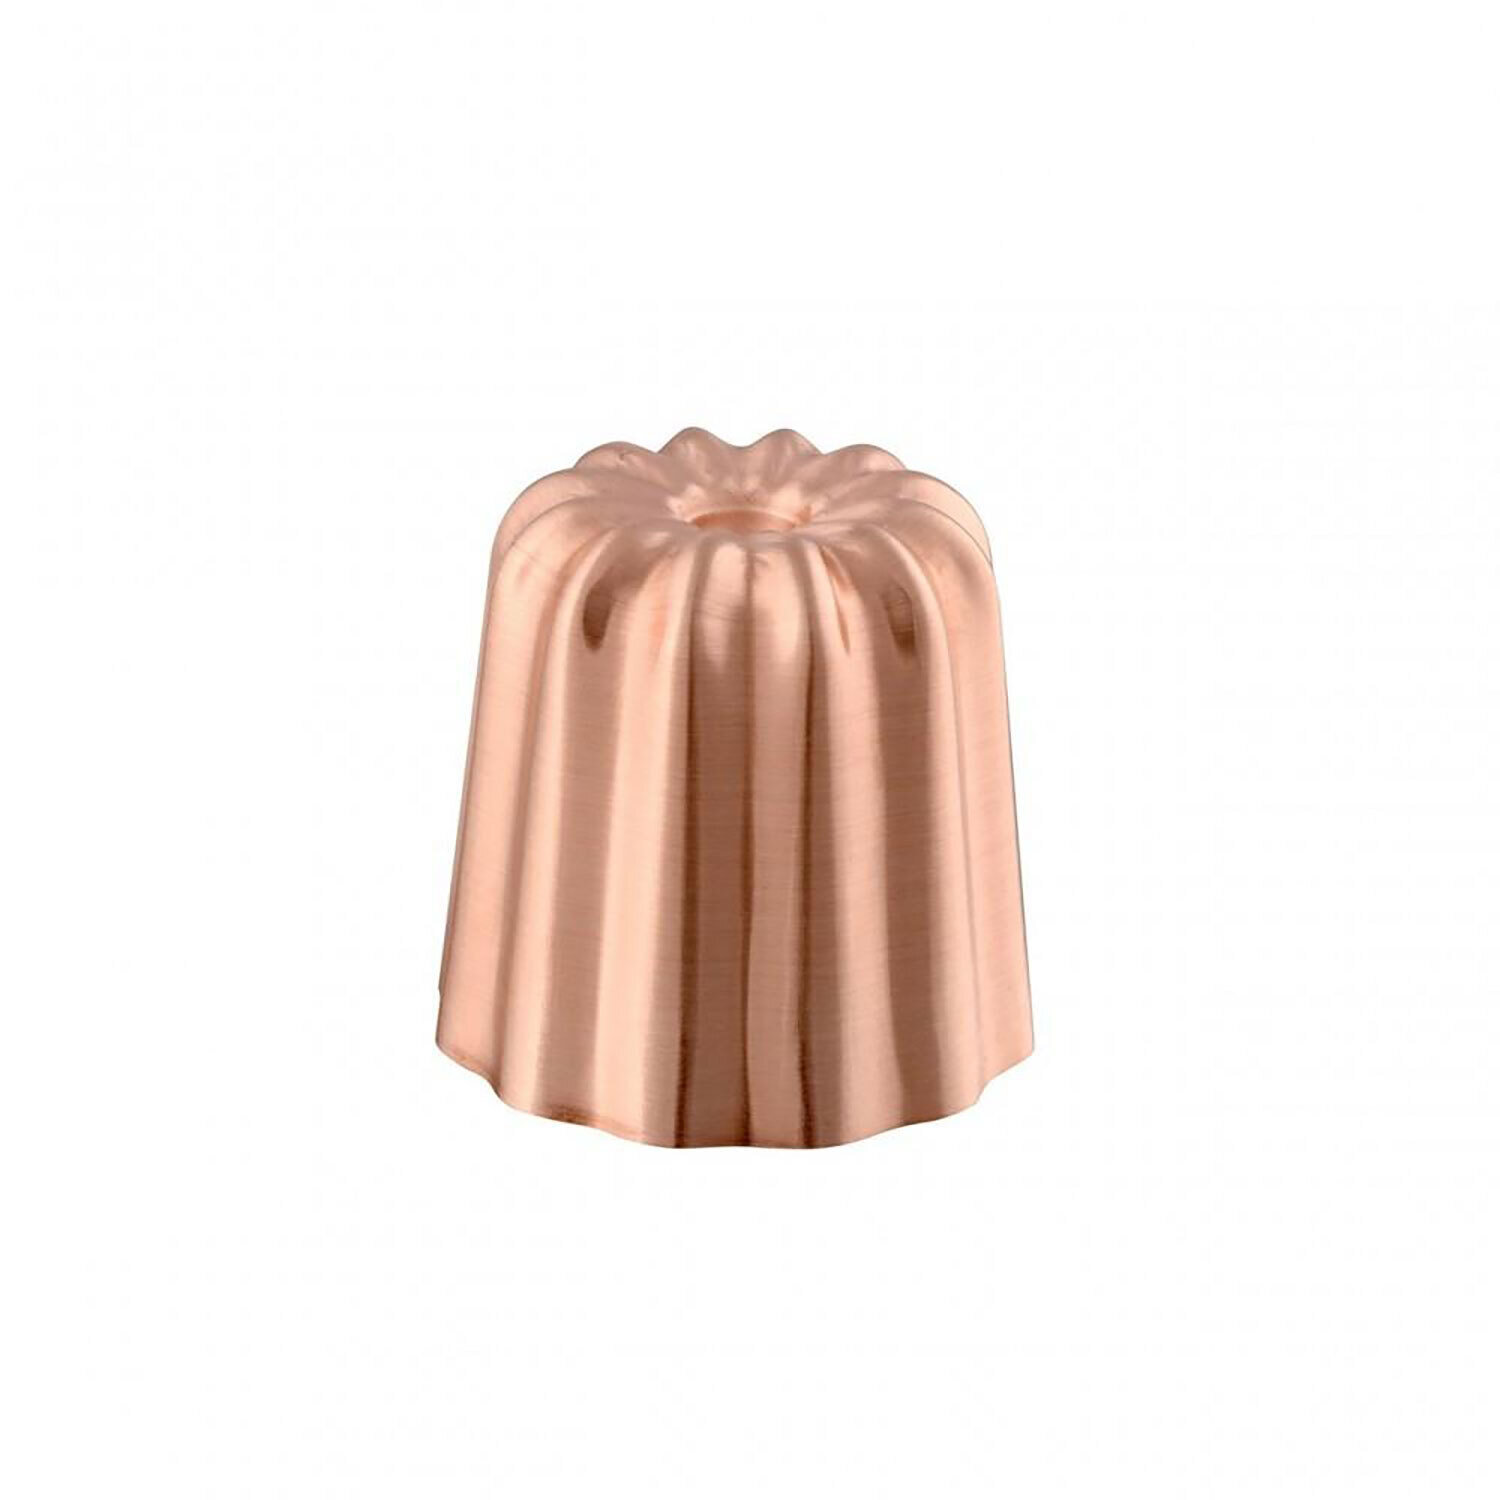 Mauviel M'PASSION Copper Tinned Canele Mold 1.4 Inch 418035